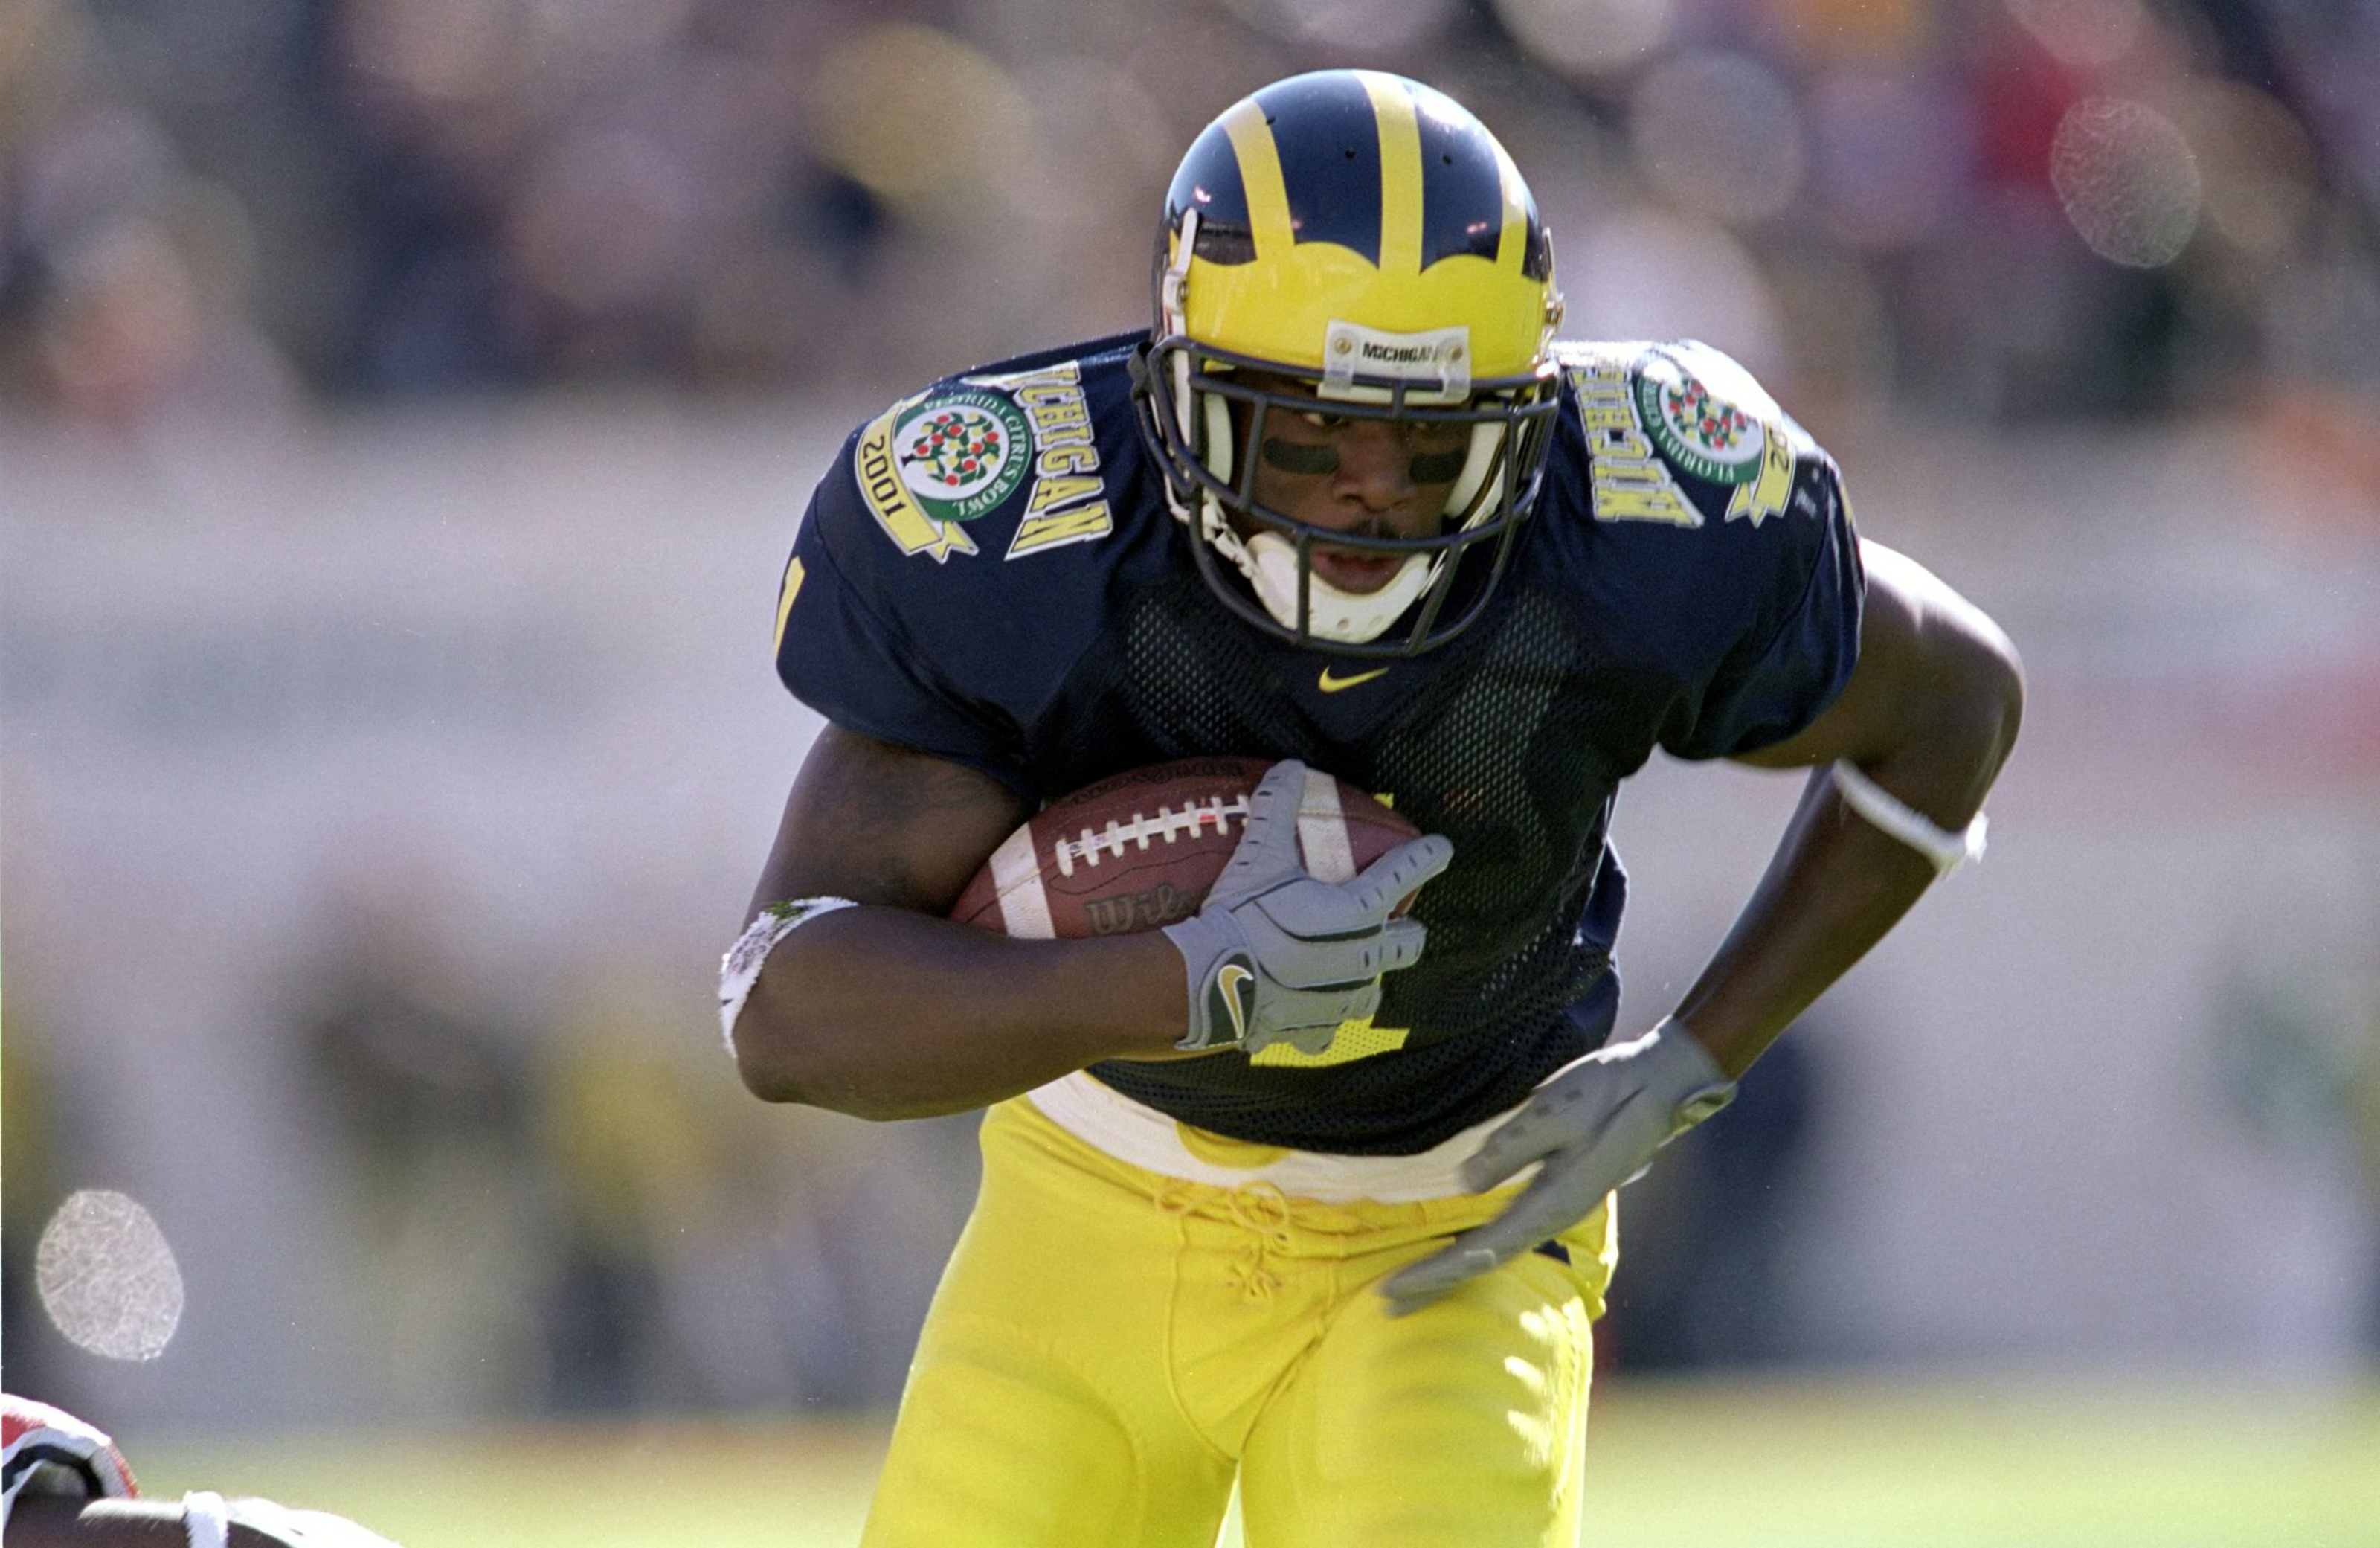 Michigan Wolverines Football 30 greatest players of alltime